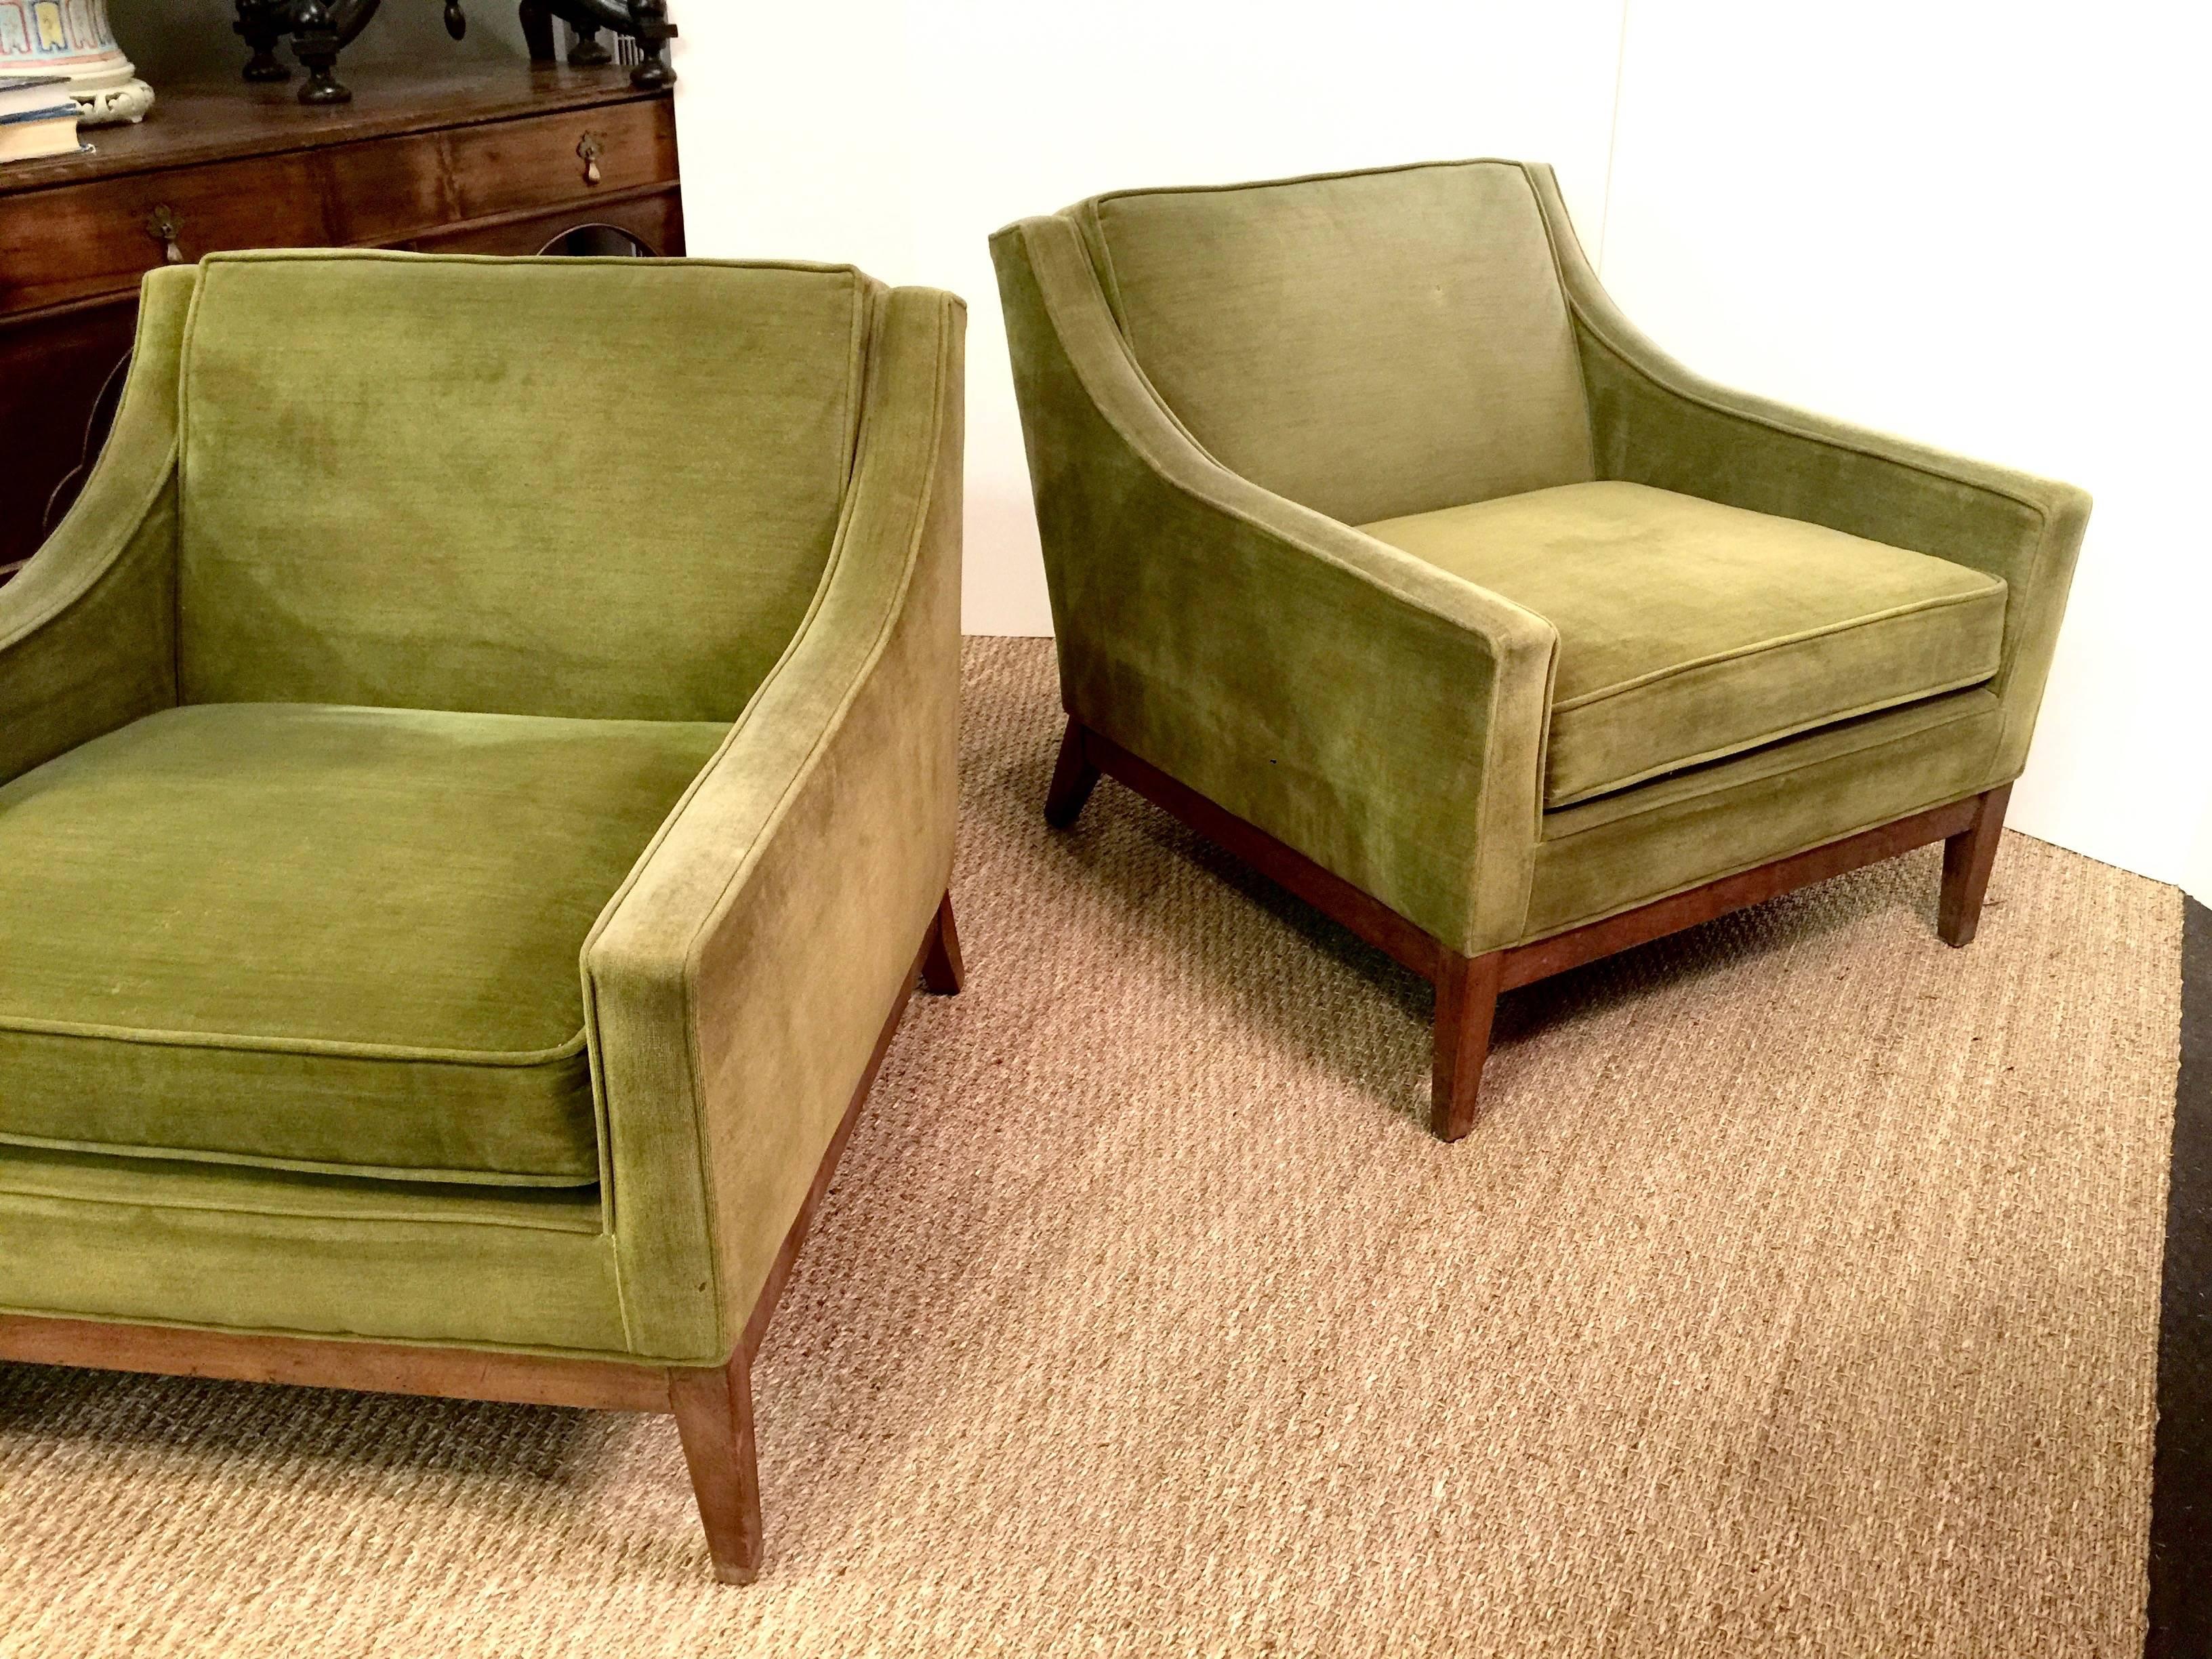 This is a very rare pair of Cal-Mode (name of Monteverdi-Young during 1st year of operation) club chairs that have retained their original lime green velvet upholstery and wood surface. The chairs date to the late 1950s and are in overall very good